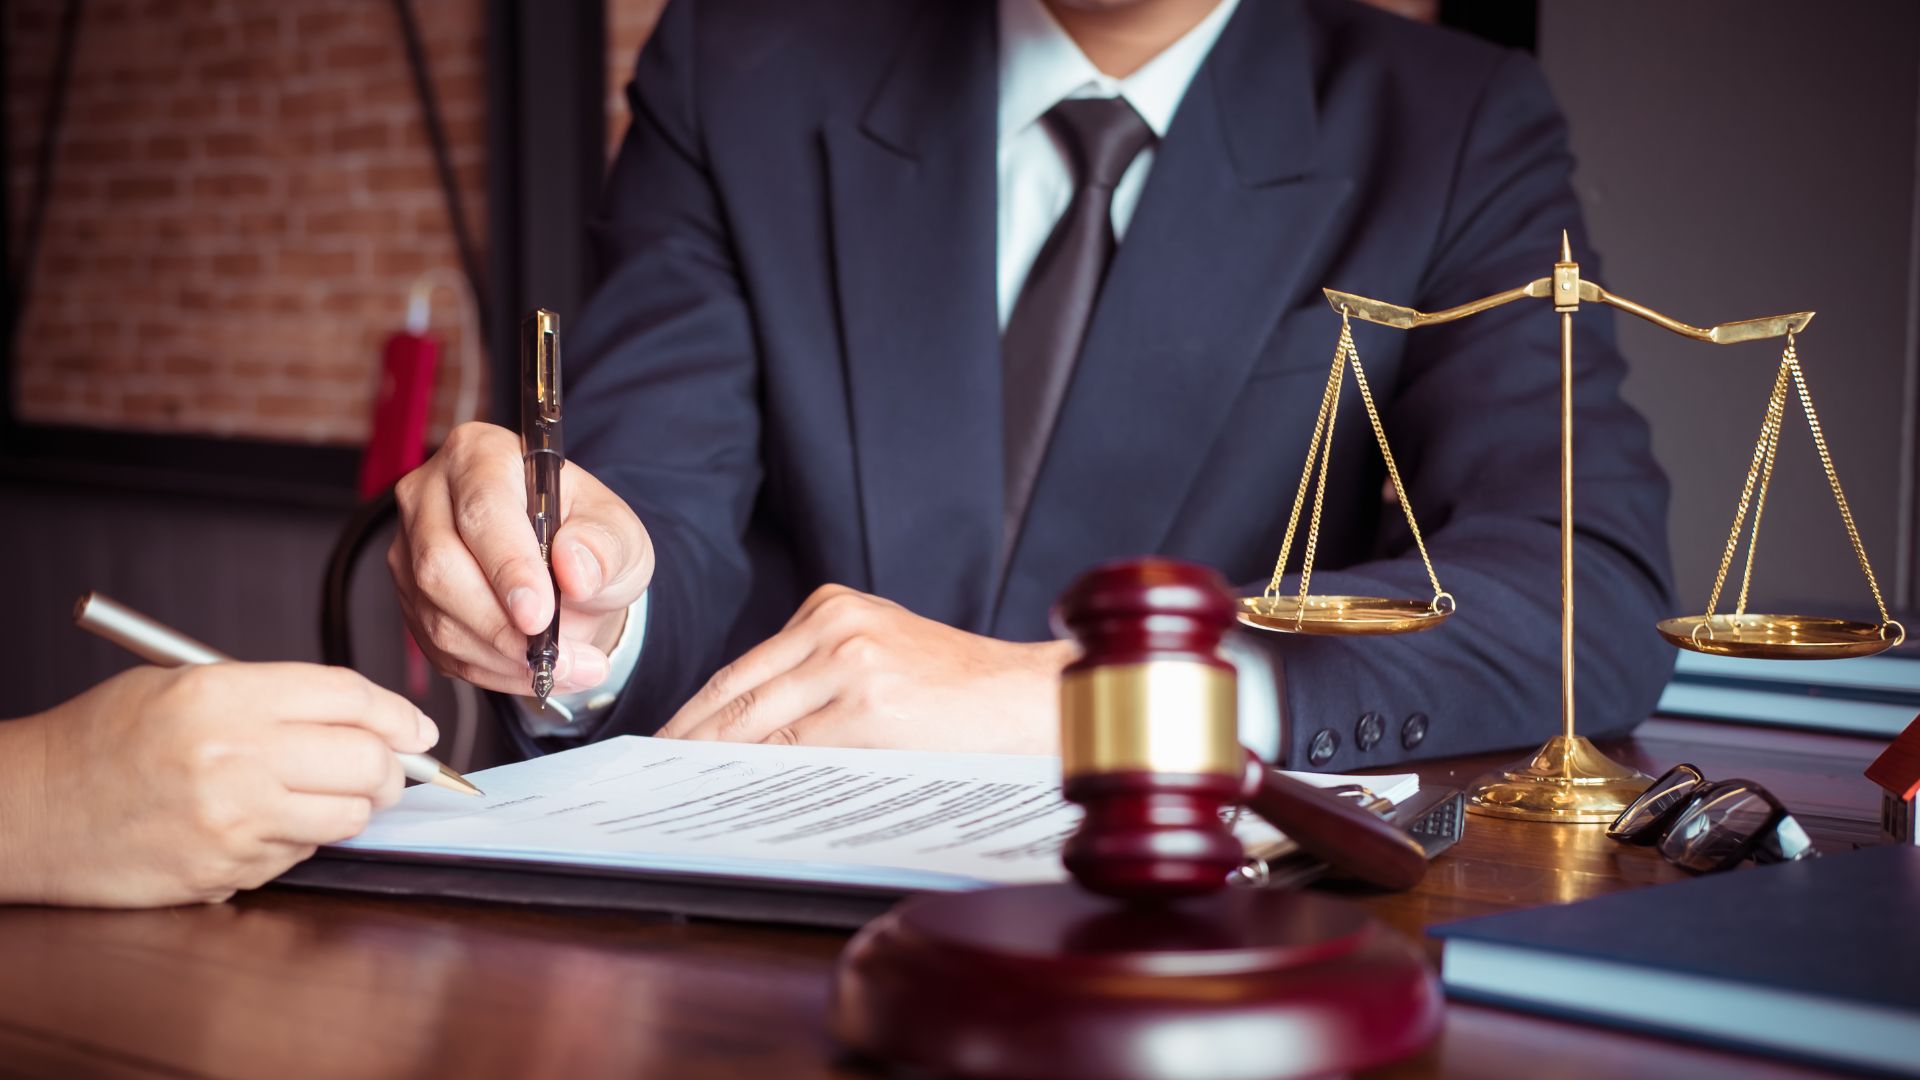 8 Reasons Why Hiring a Personal Injury Lawyer Strengthens Your Case article thumbnail